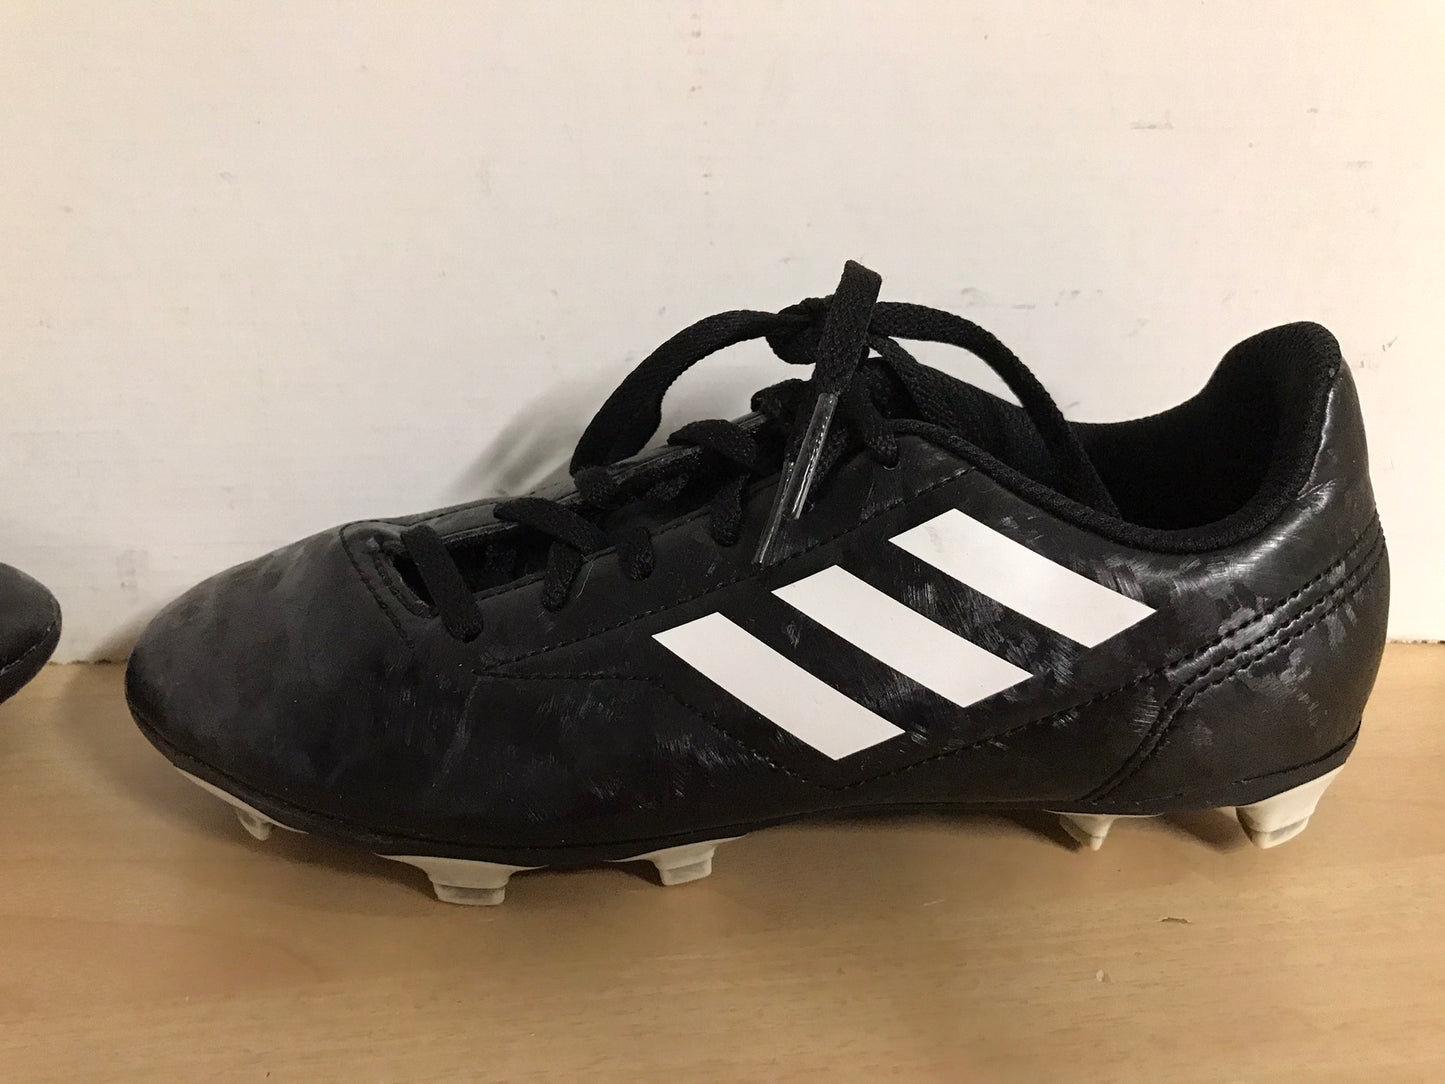 Soccer Shoes Cleats Child Size 4.5 Adidas Black White Excellent